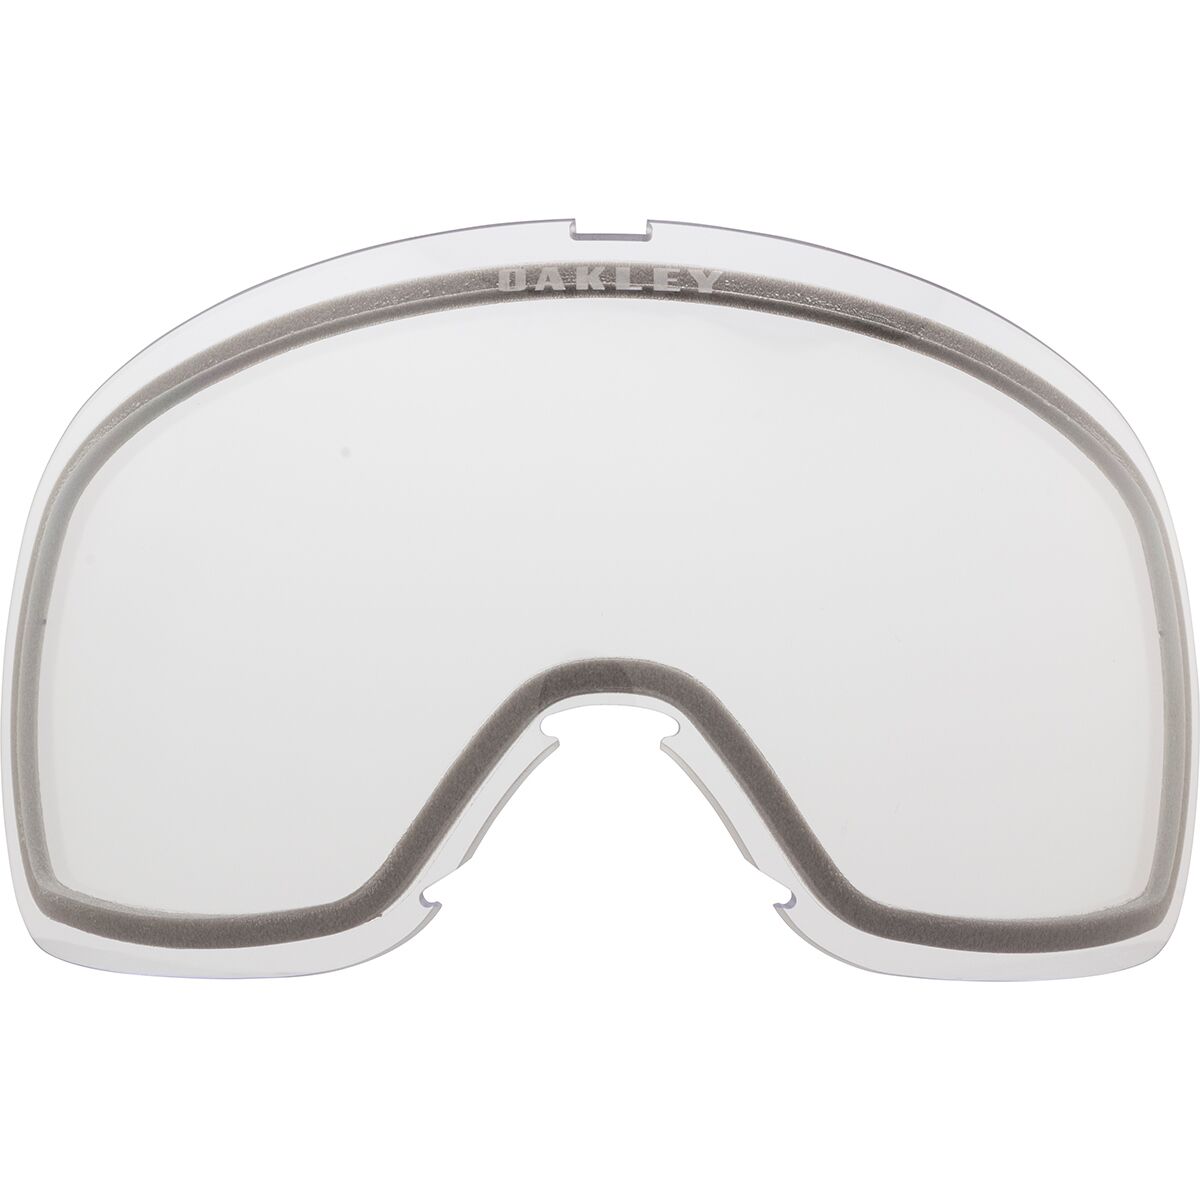 Flight Tracker L Goggles Replacement Lens